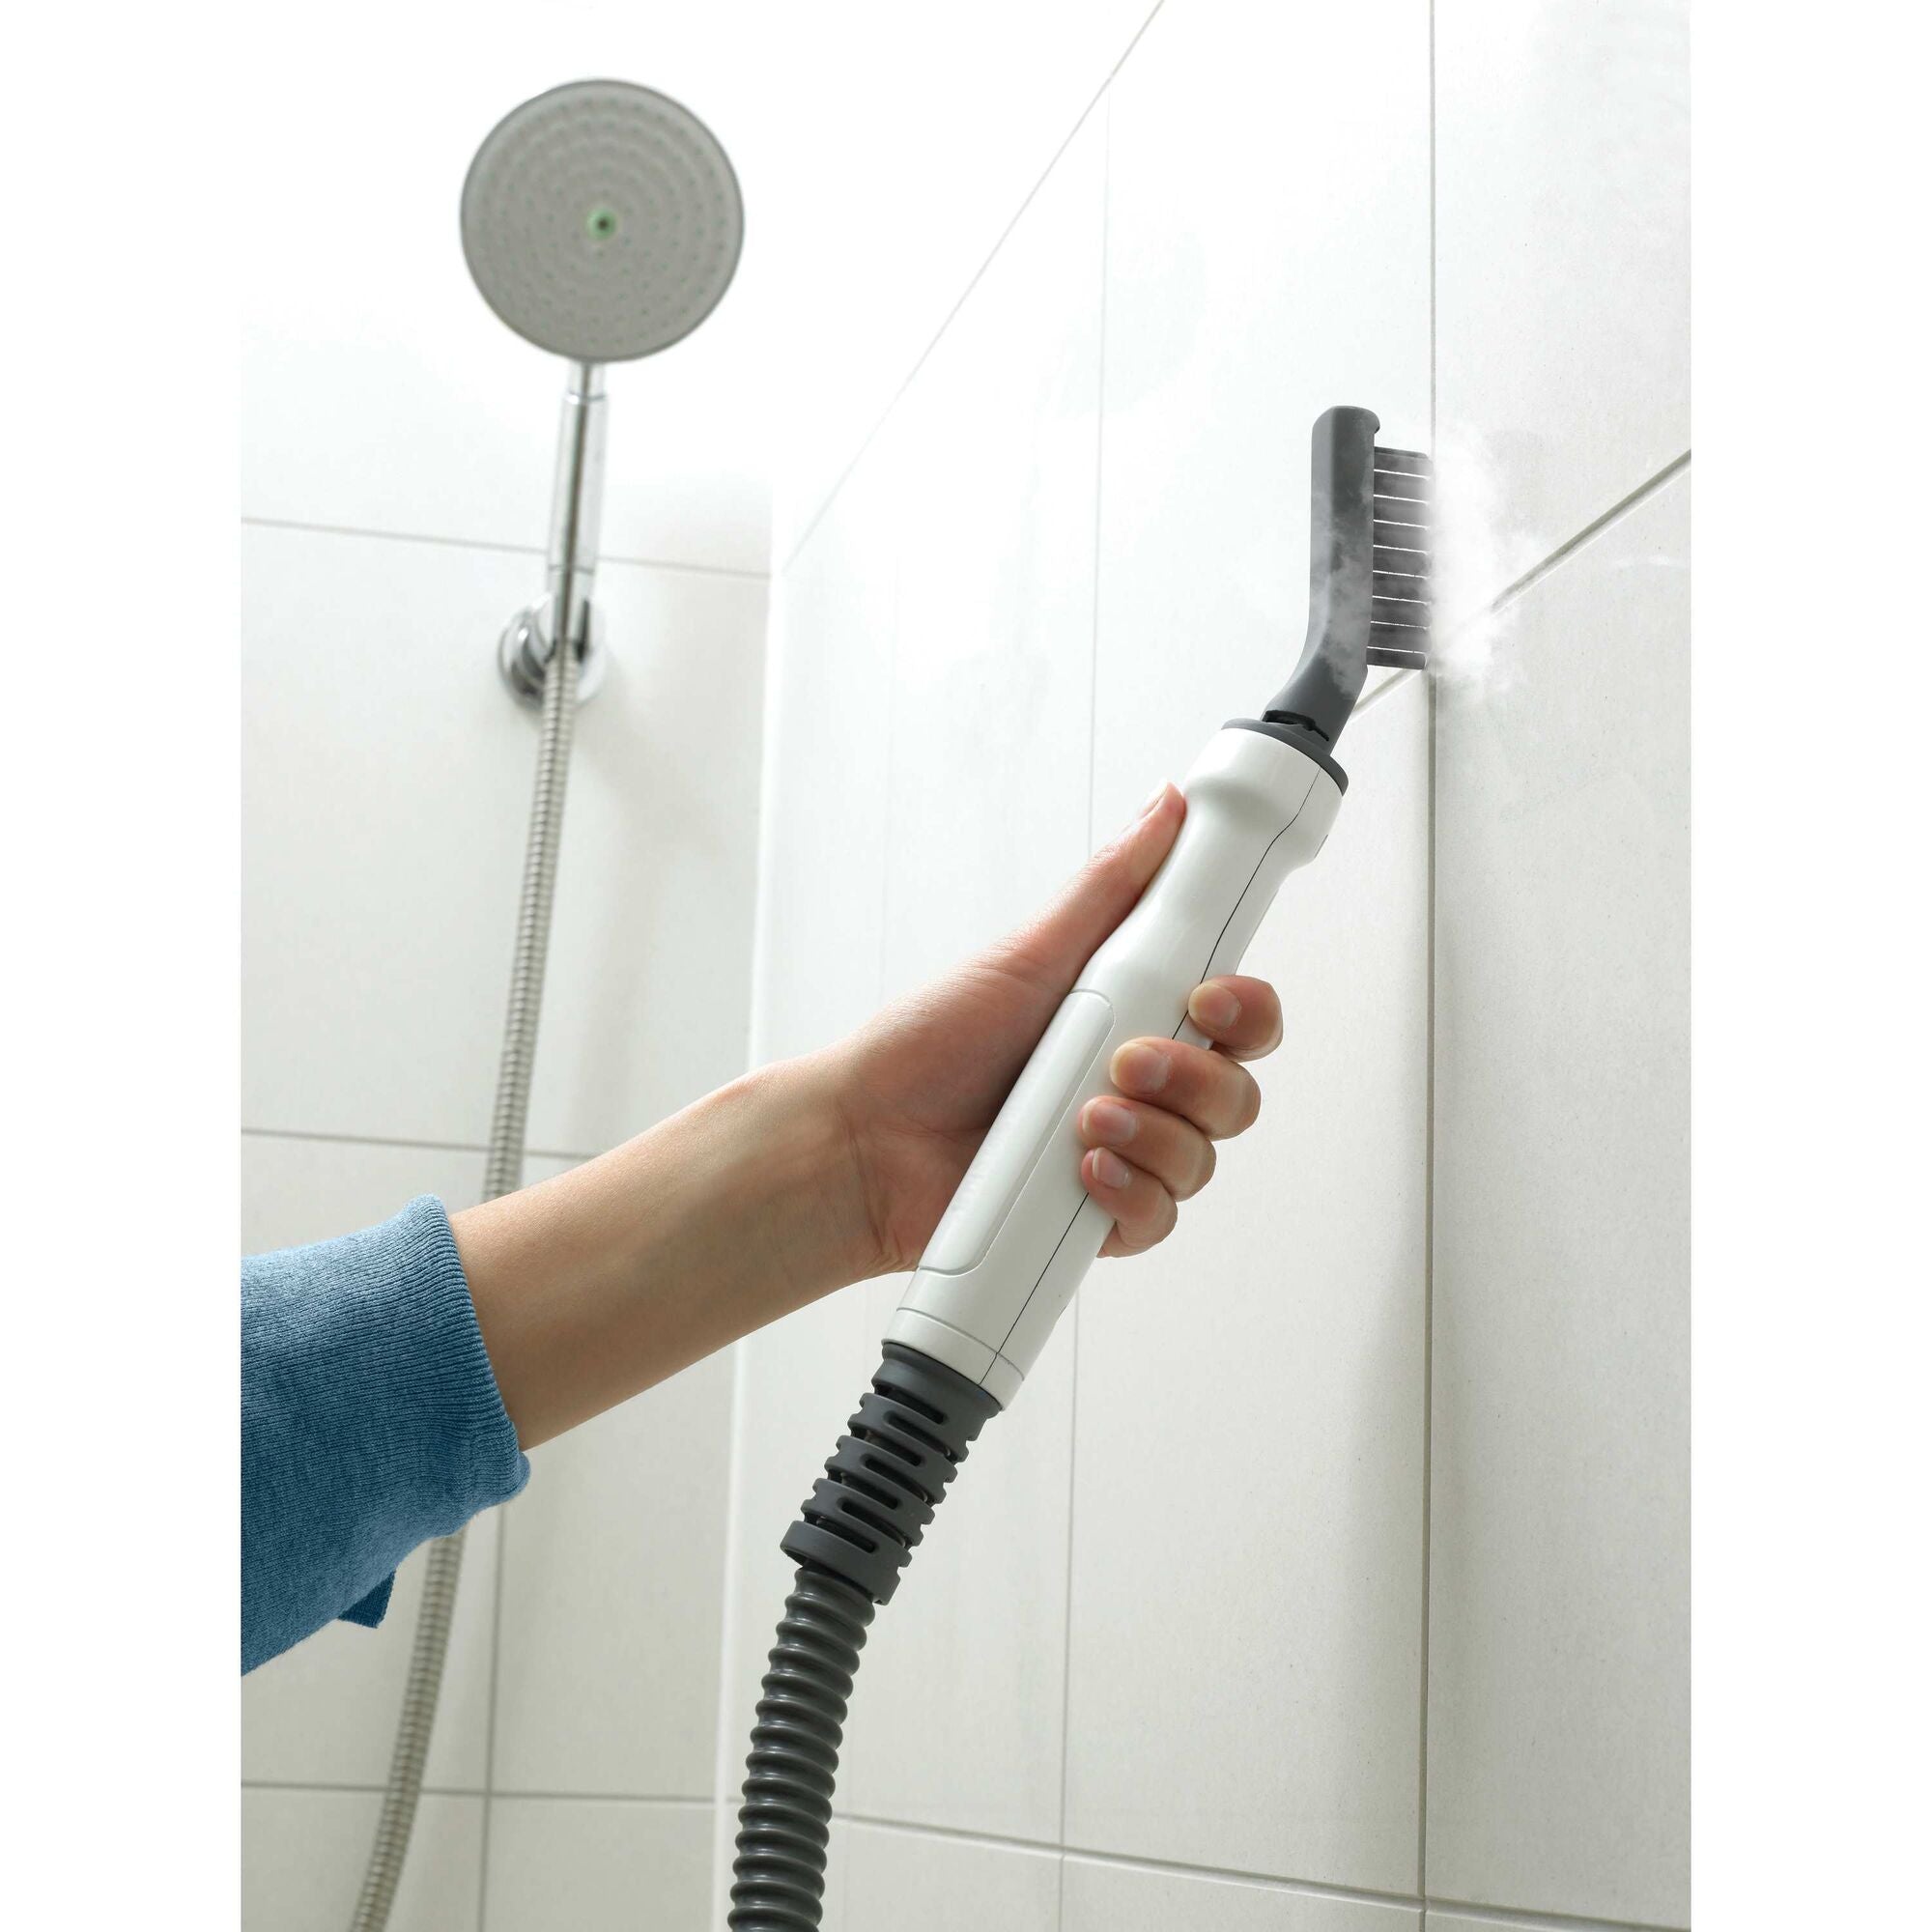 BLACK+DECKER SteamMop™ And Portable Steamer cleaning the space between the bathroom wall tiles.